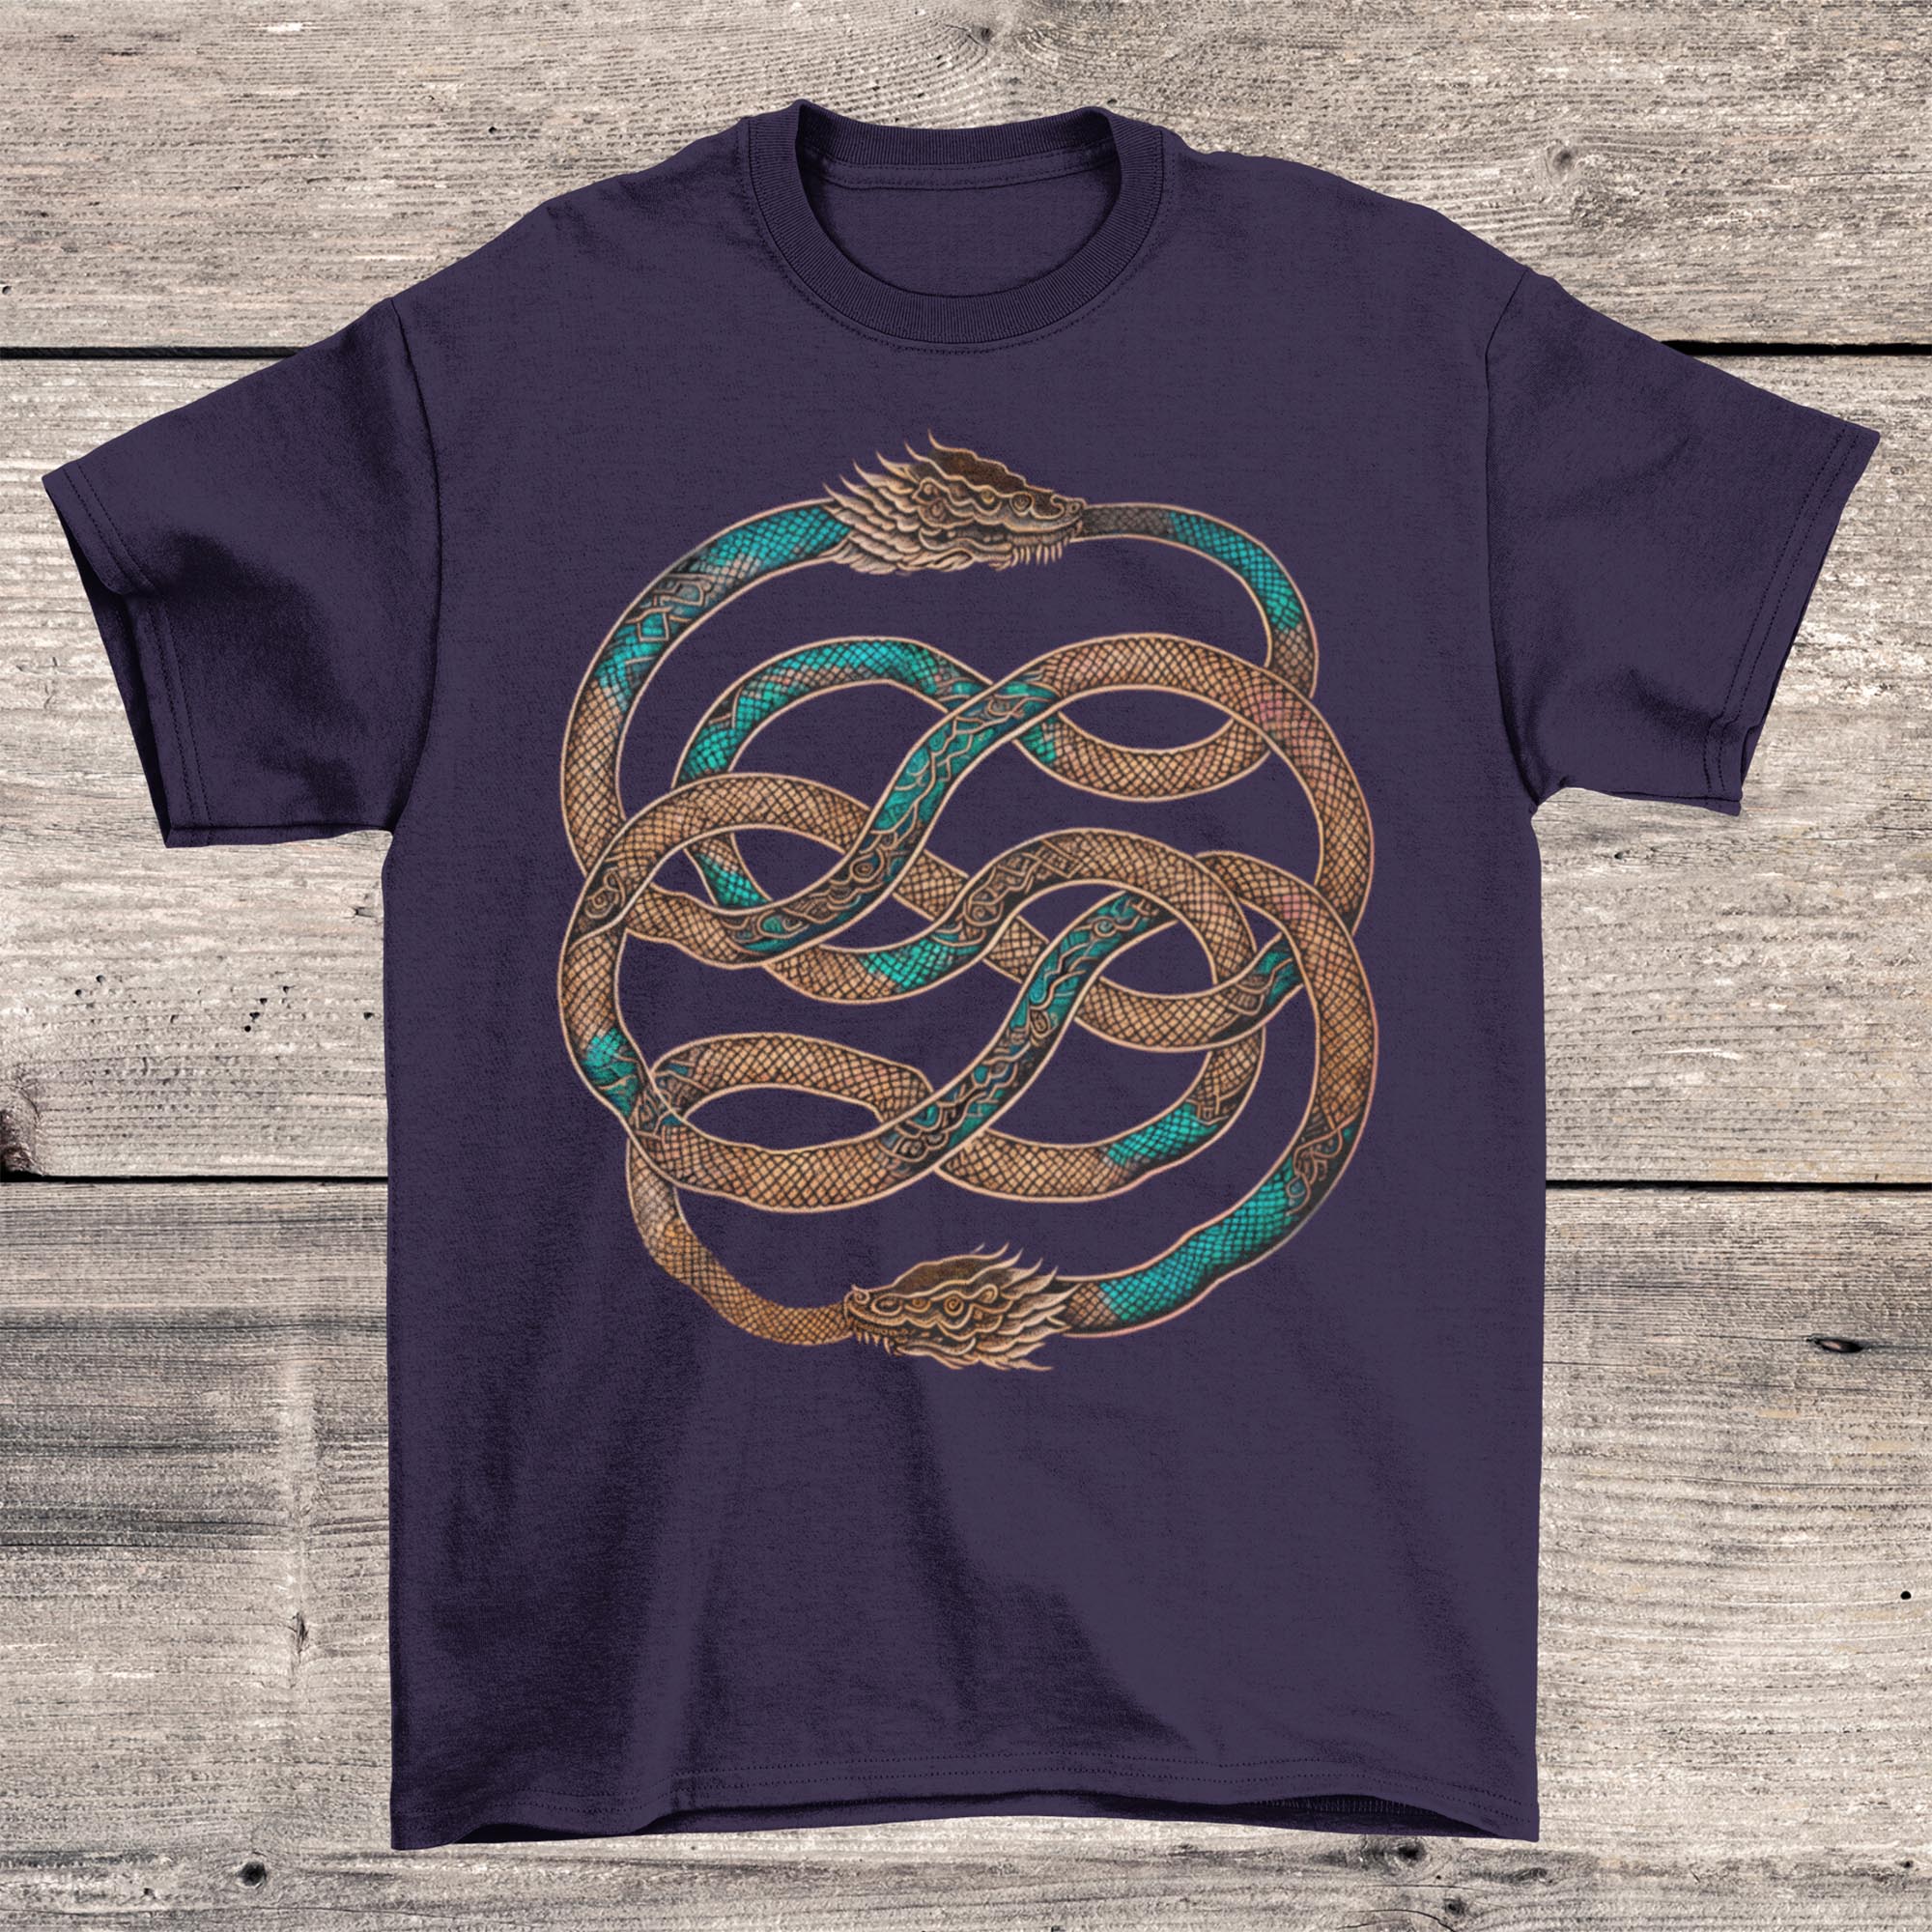 T-Shirts S / Blackberry The Ouroboros: Medieval Mystical Serpent, Dragon | Esoteric Alchemy | Egyptian Circle of Life Graphic Art T-Shirt